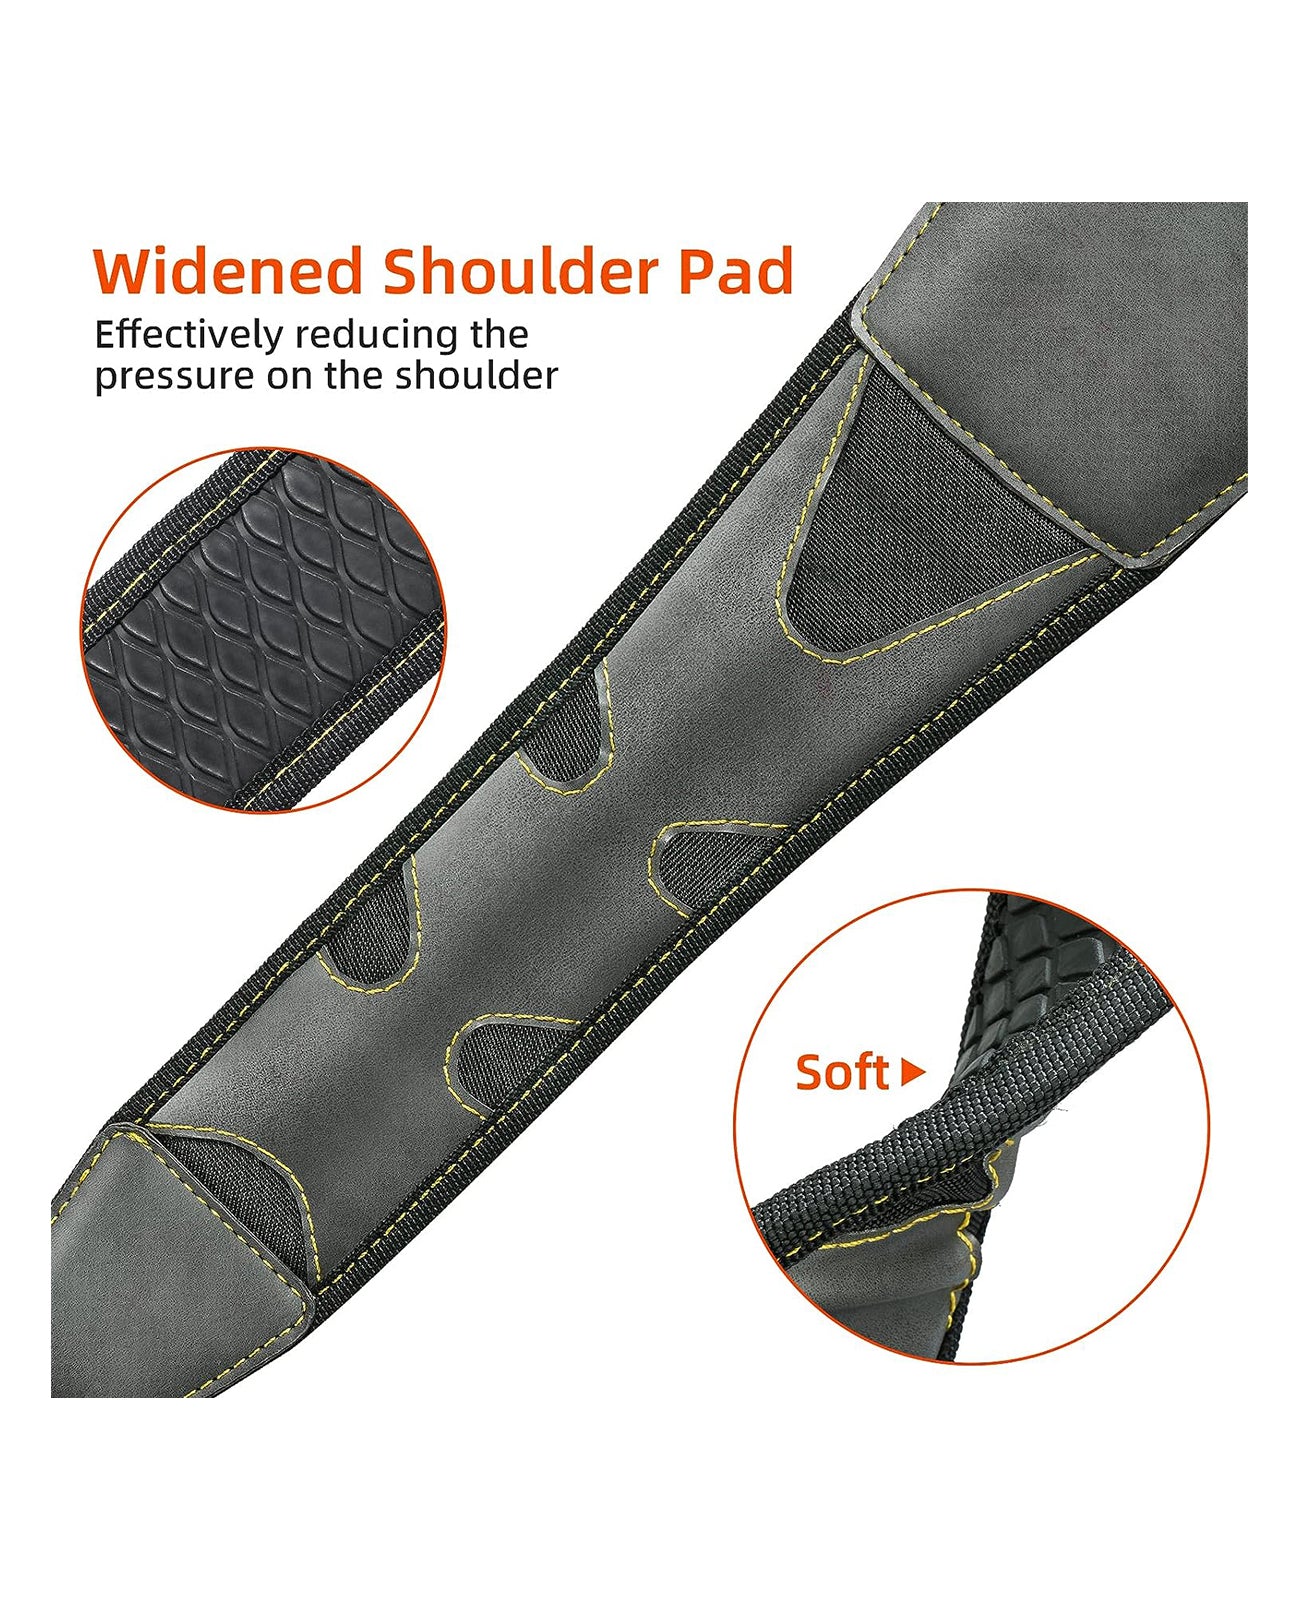 2 Point Sling with Widened Shoulder Pad